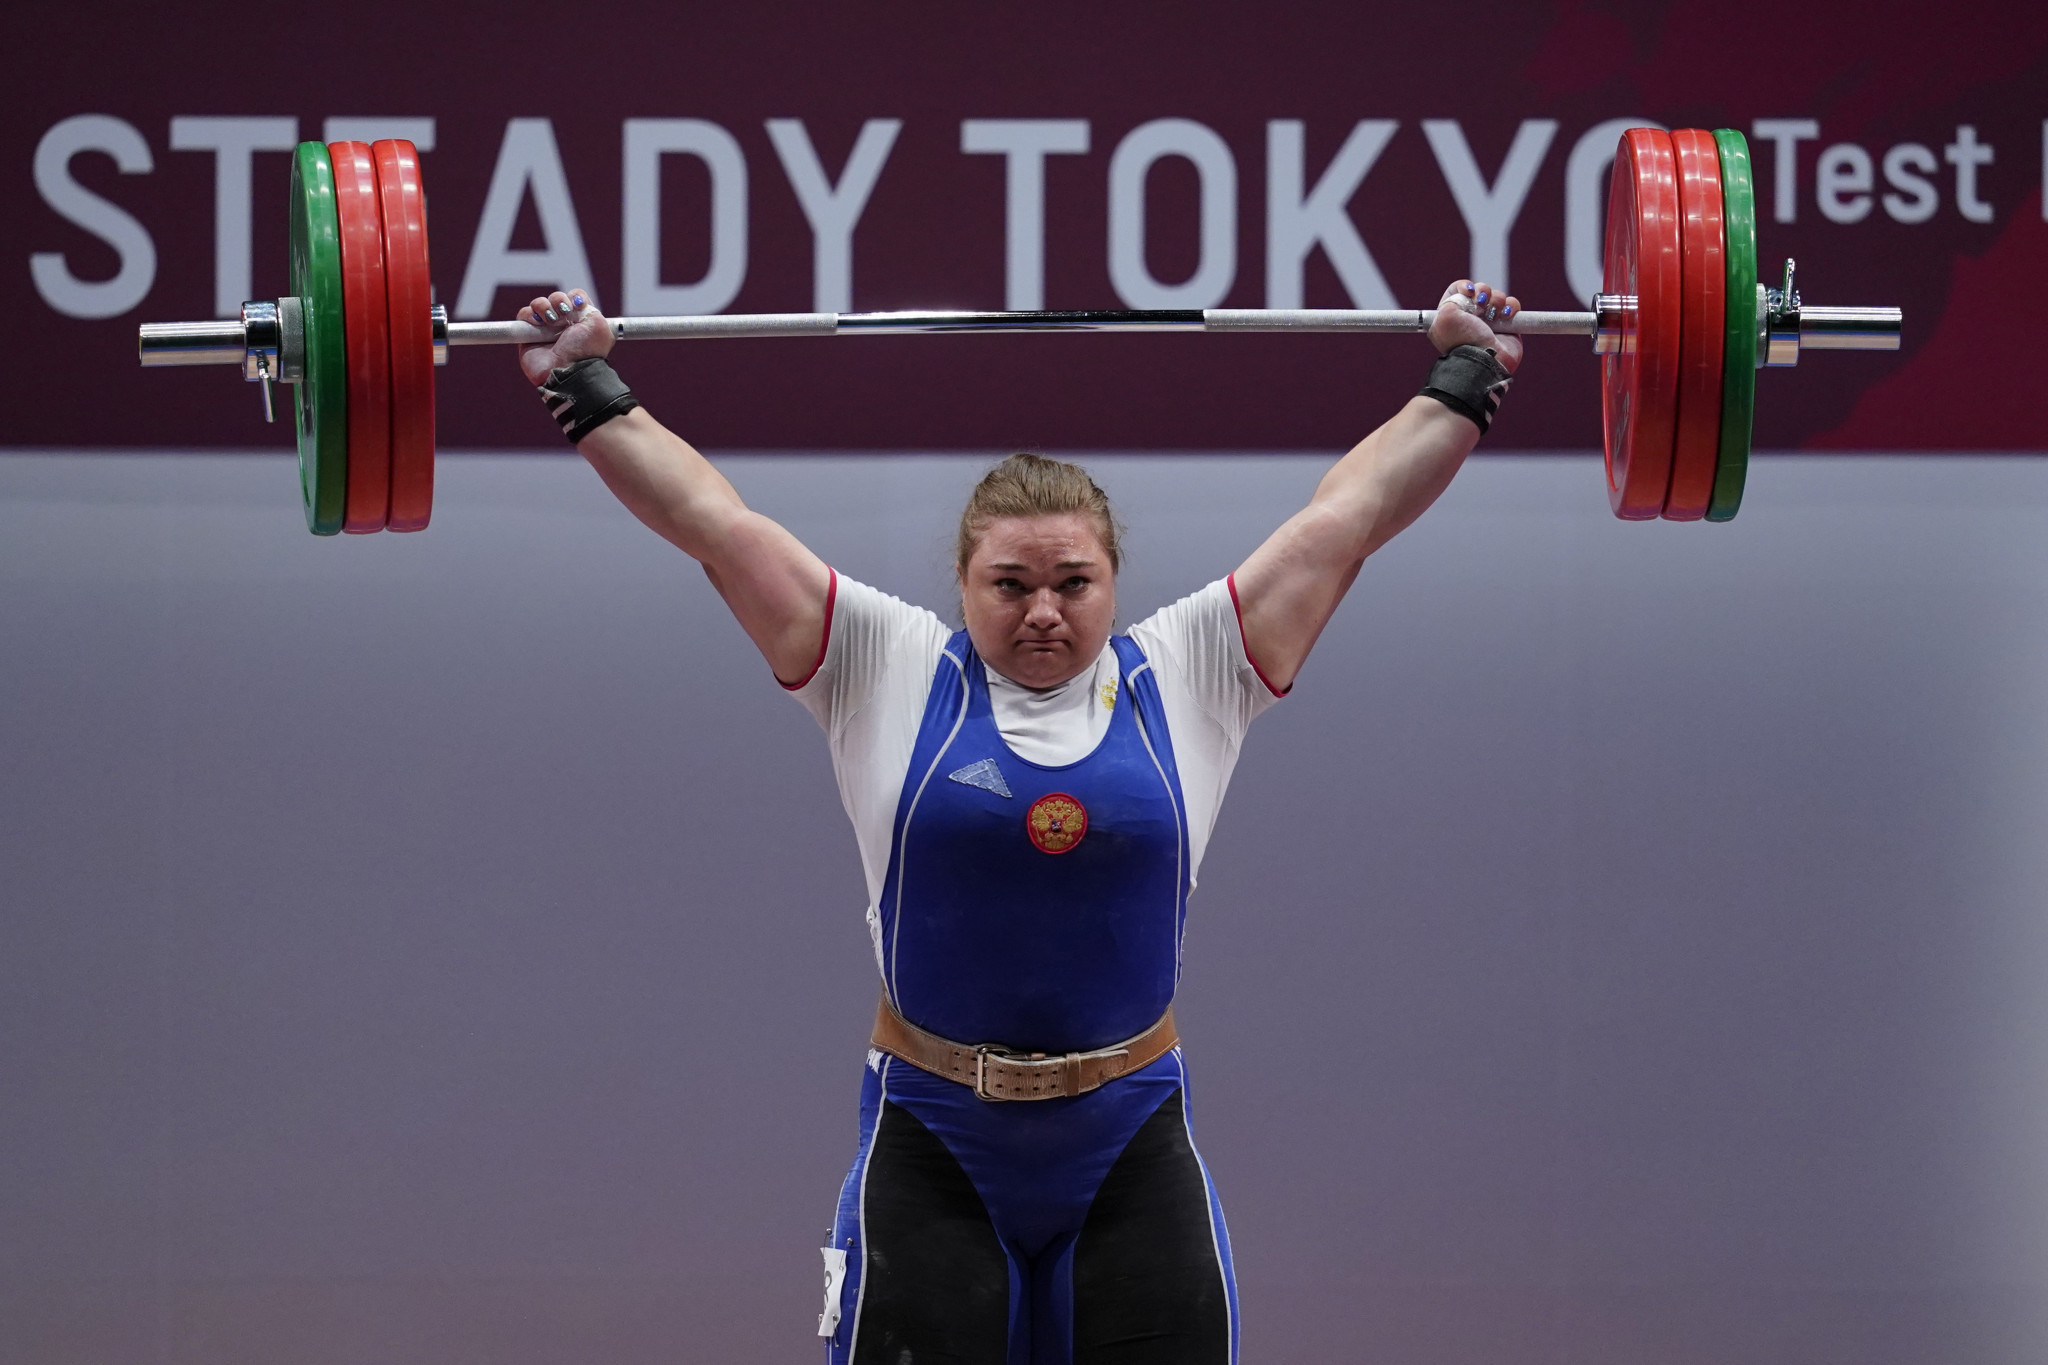 Russia has agreed a partnership project with the Indian Weightlifting Federation ©Getty Images